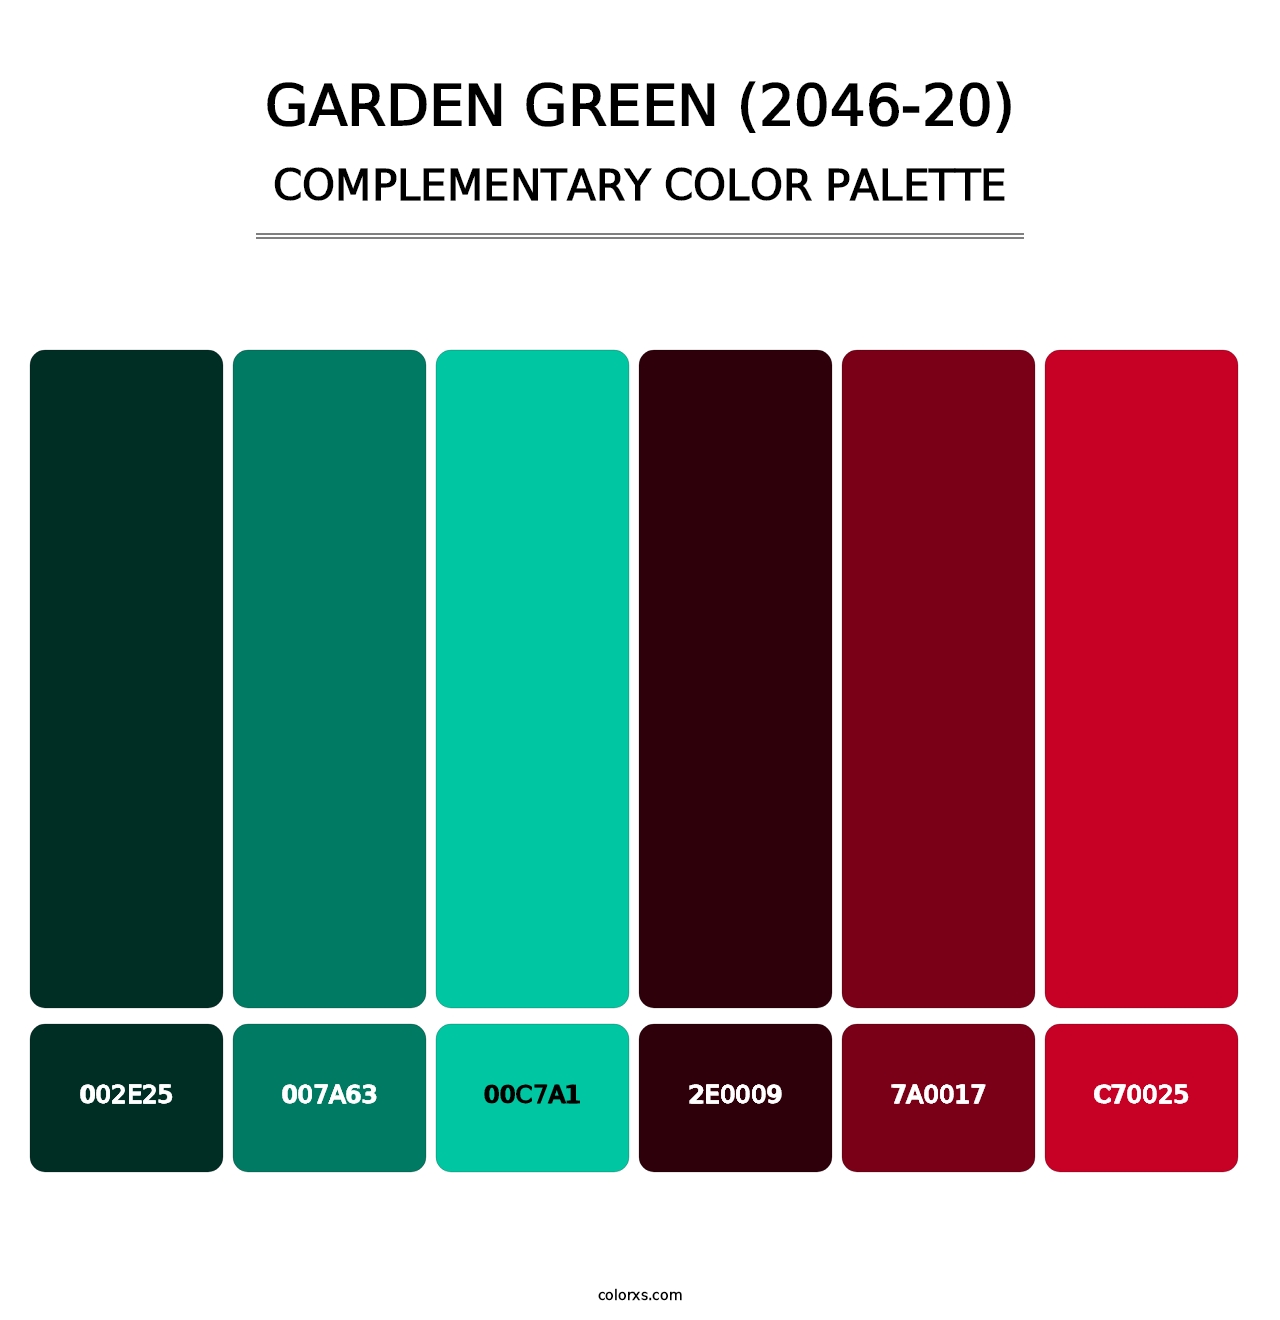 Garden Green (2046-20) - Complementary Color Palette